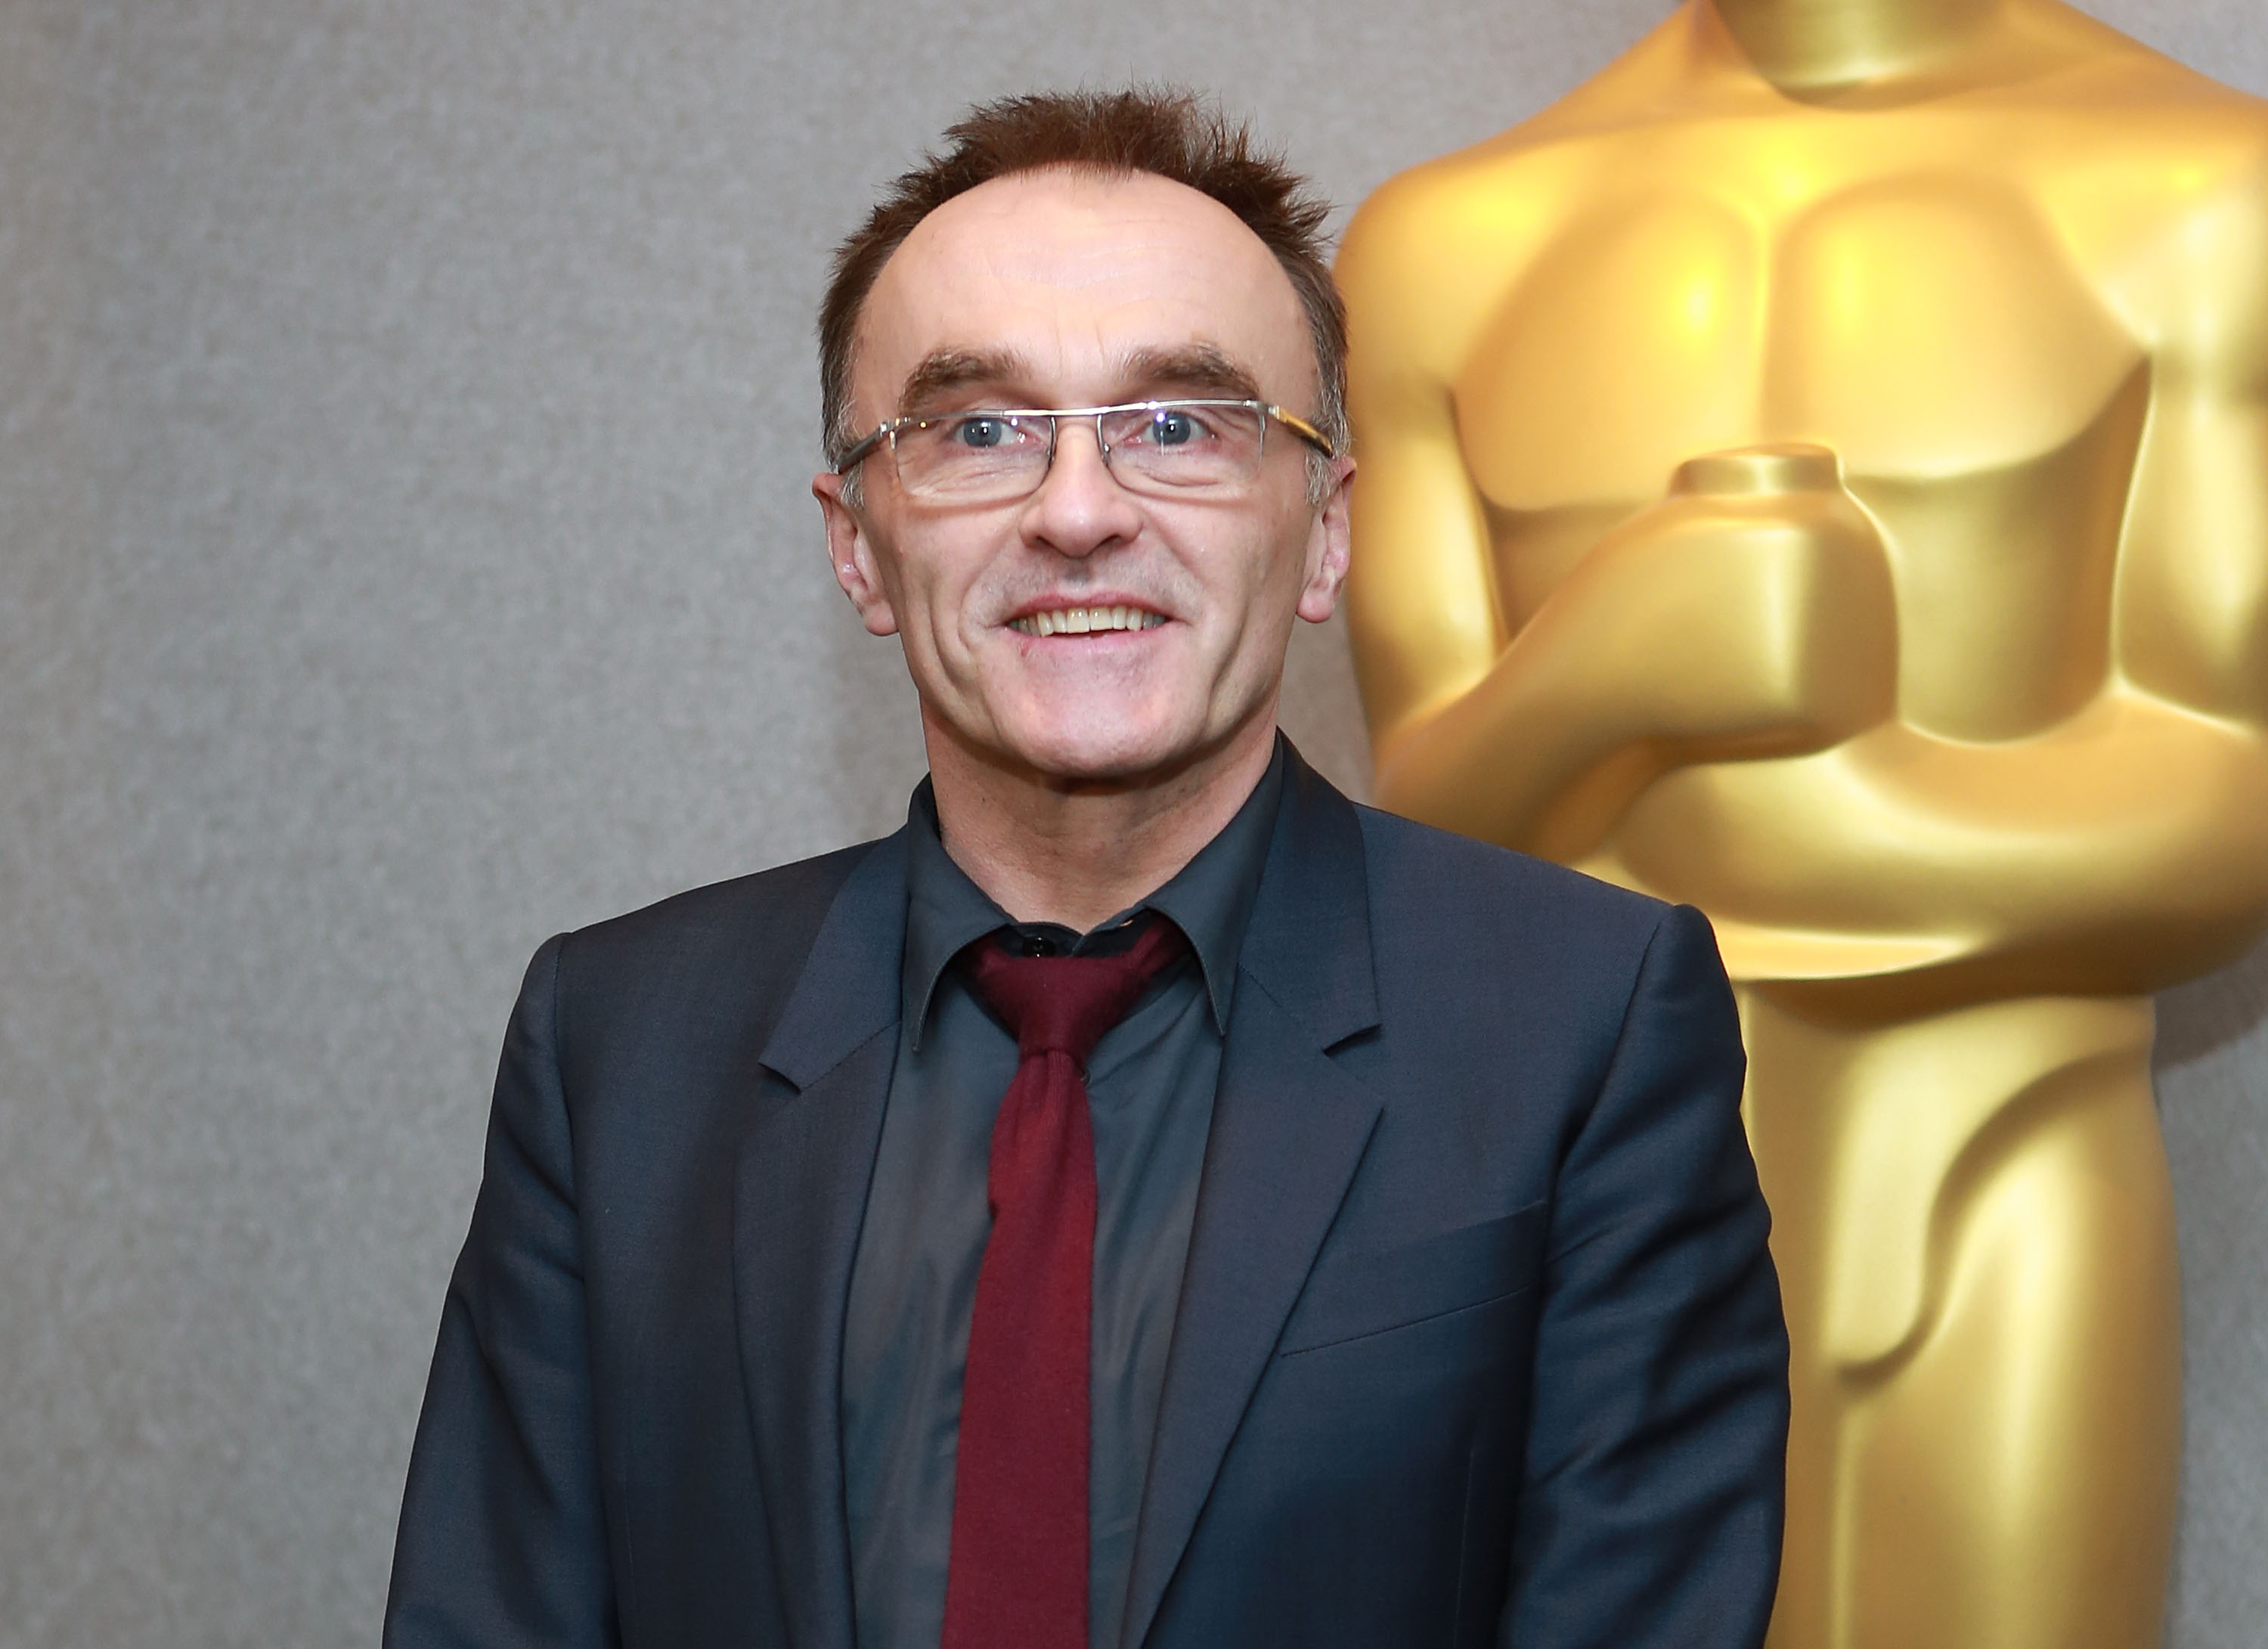 NEW YORK, NY - APRIL 04: Director/Producer Danny Boyle attends AMPAS Presents: An Academy Conversation With Danny Boyle at The Academy Theater on April 4, 2013 in New York City. (Photo by Robin Marchant/Getty Images)